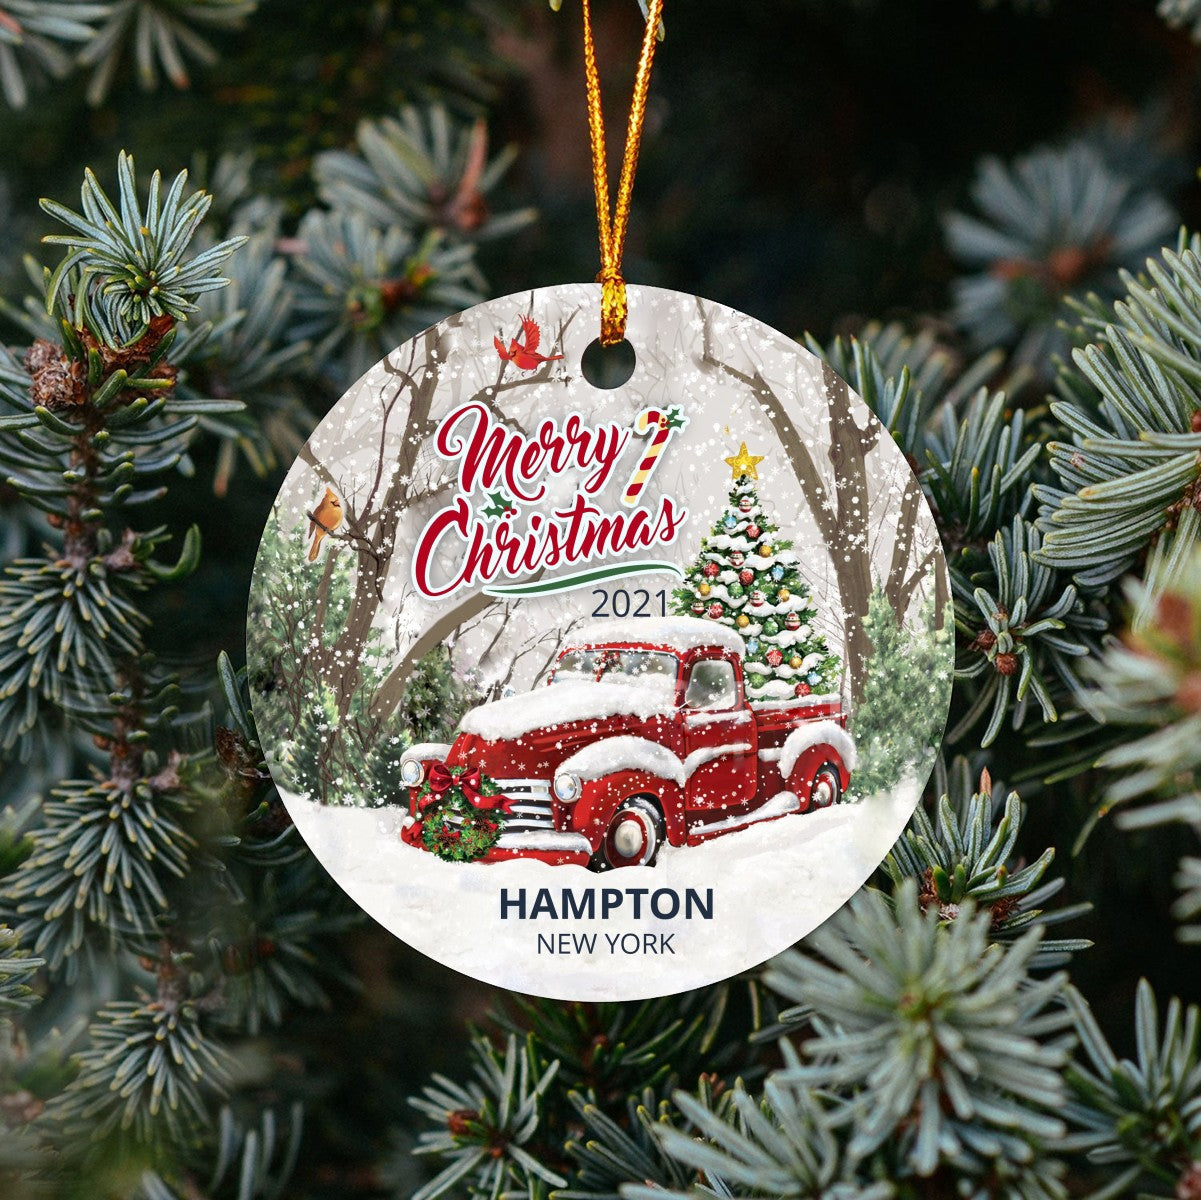 Christmas Tree Ornaments Hampton - Ornament With Name City, State Hampton New York NY Ornament - Red Truck Xmas Ornaments 3'' Plastic Gift For Family, Friend And Housewarming